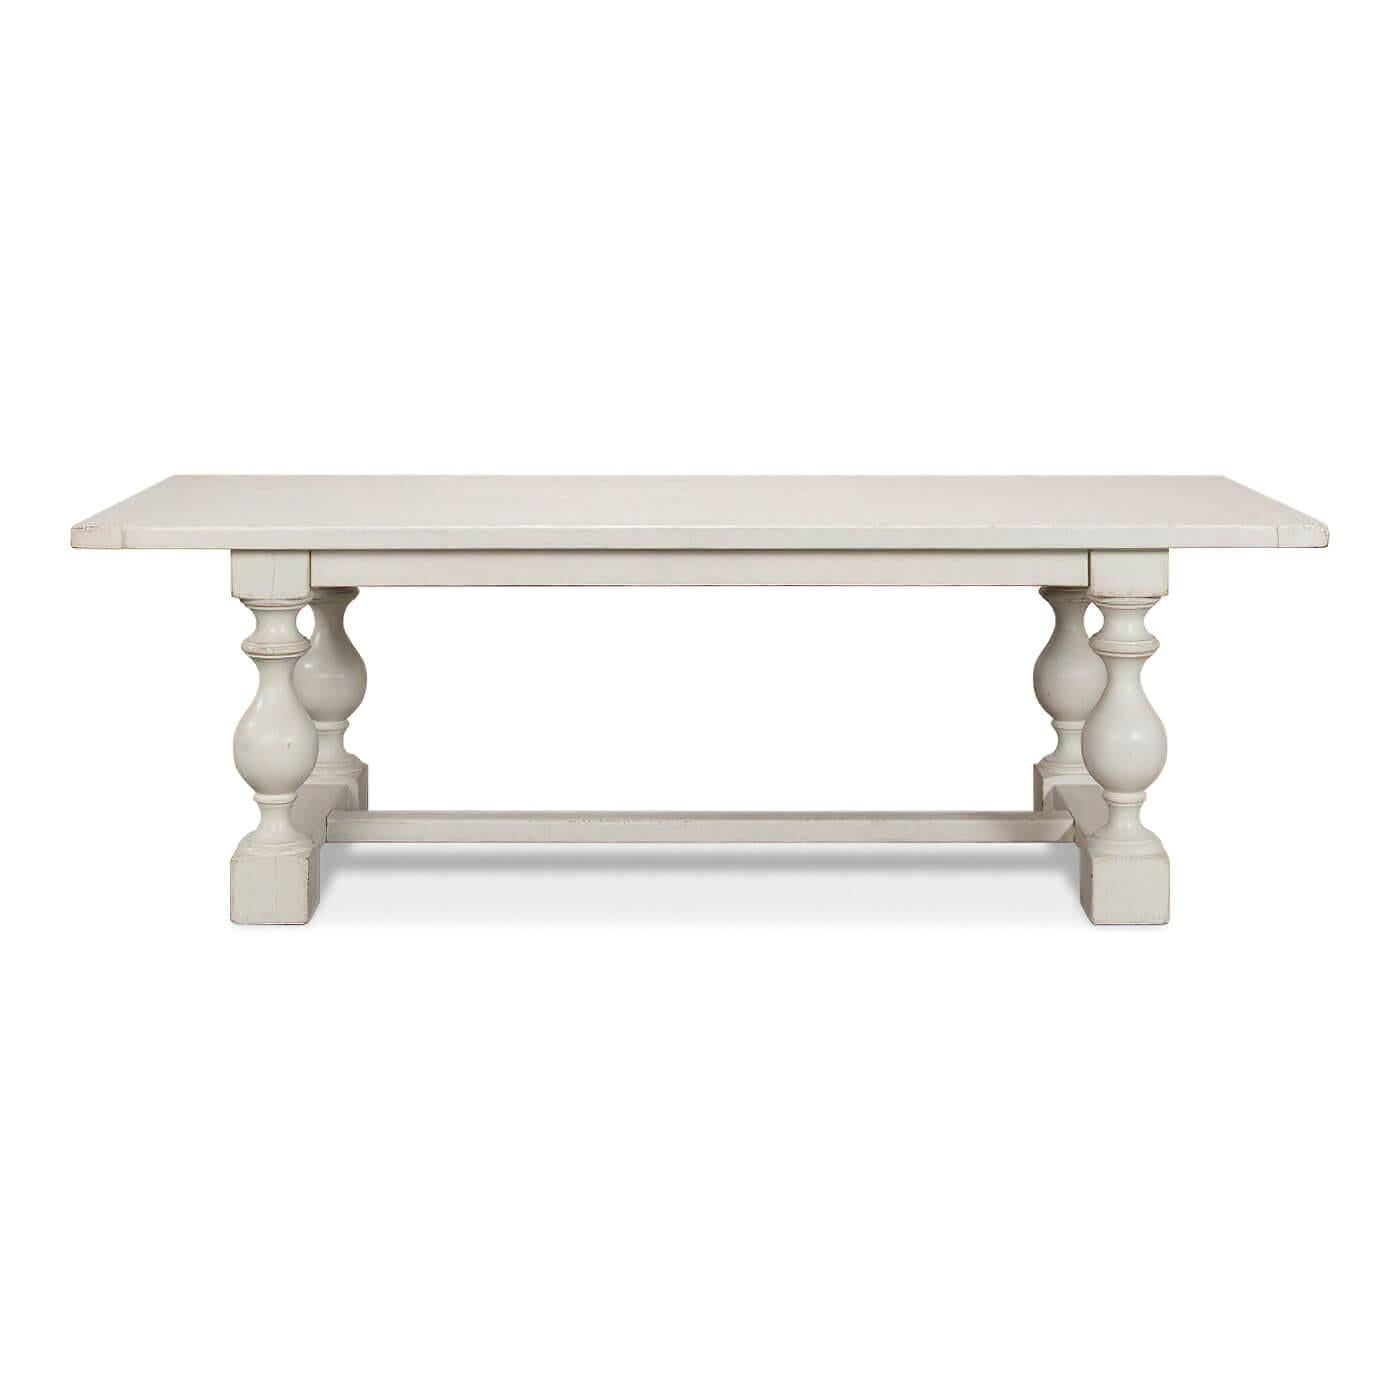 An English Country style antique white dining table with bold shapely turned baluster supports and an H stretcher base. Made of reclaimed pine with a breadboard end plank top.

Dimensions: 94